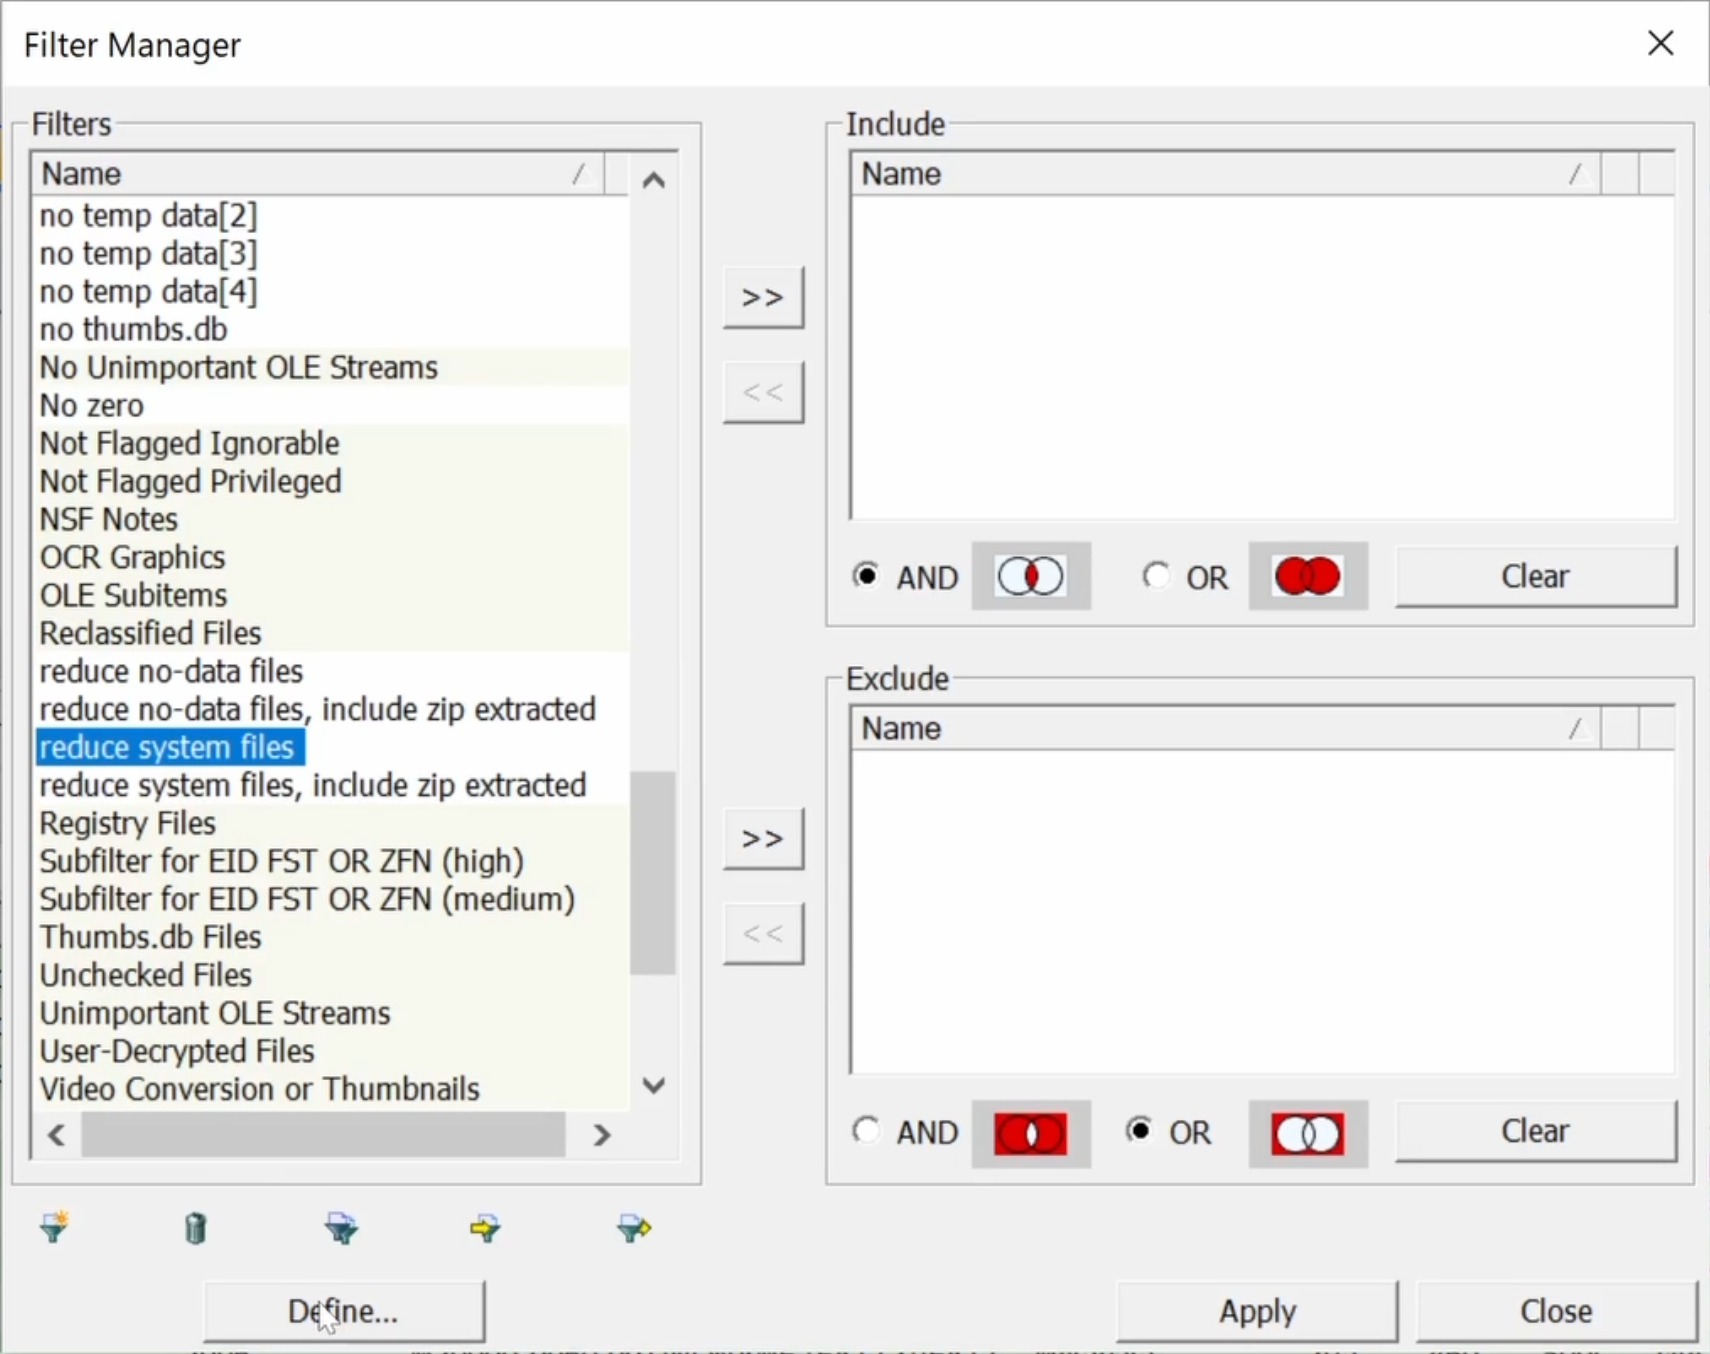 Filter Manager window with reduce system files filter highlighted and cursor over Define button